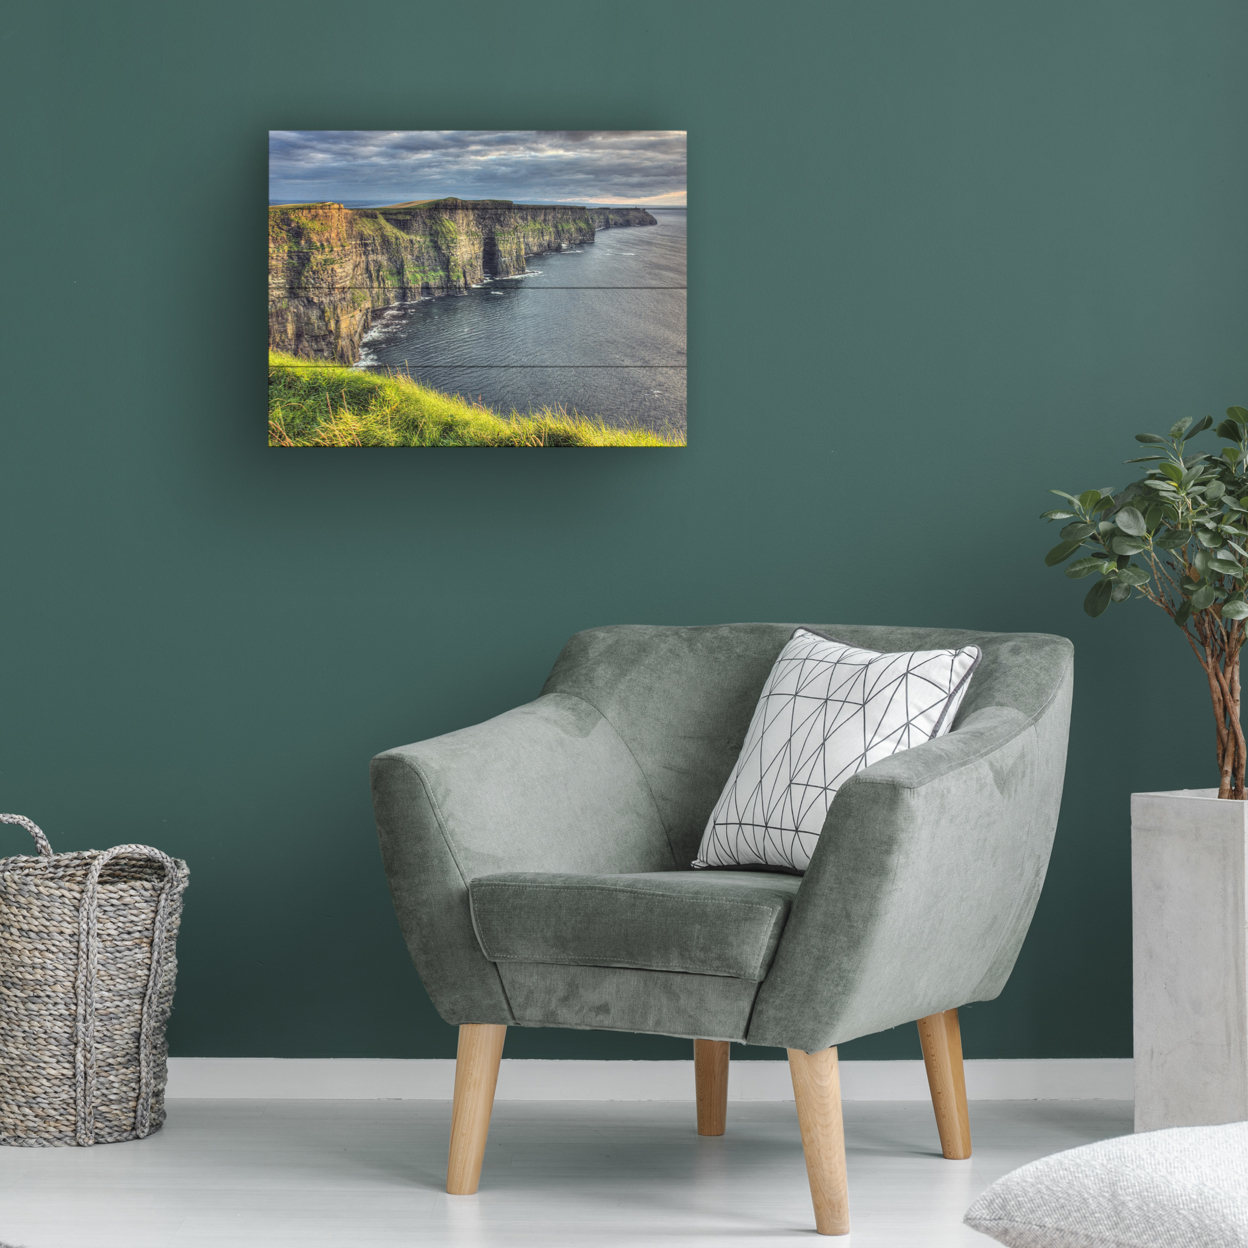 Wall Art 12 X 16 Inches Titled Cliffs Of Moher Ireland Ready To Hang Printed On Wooden Planks